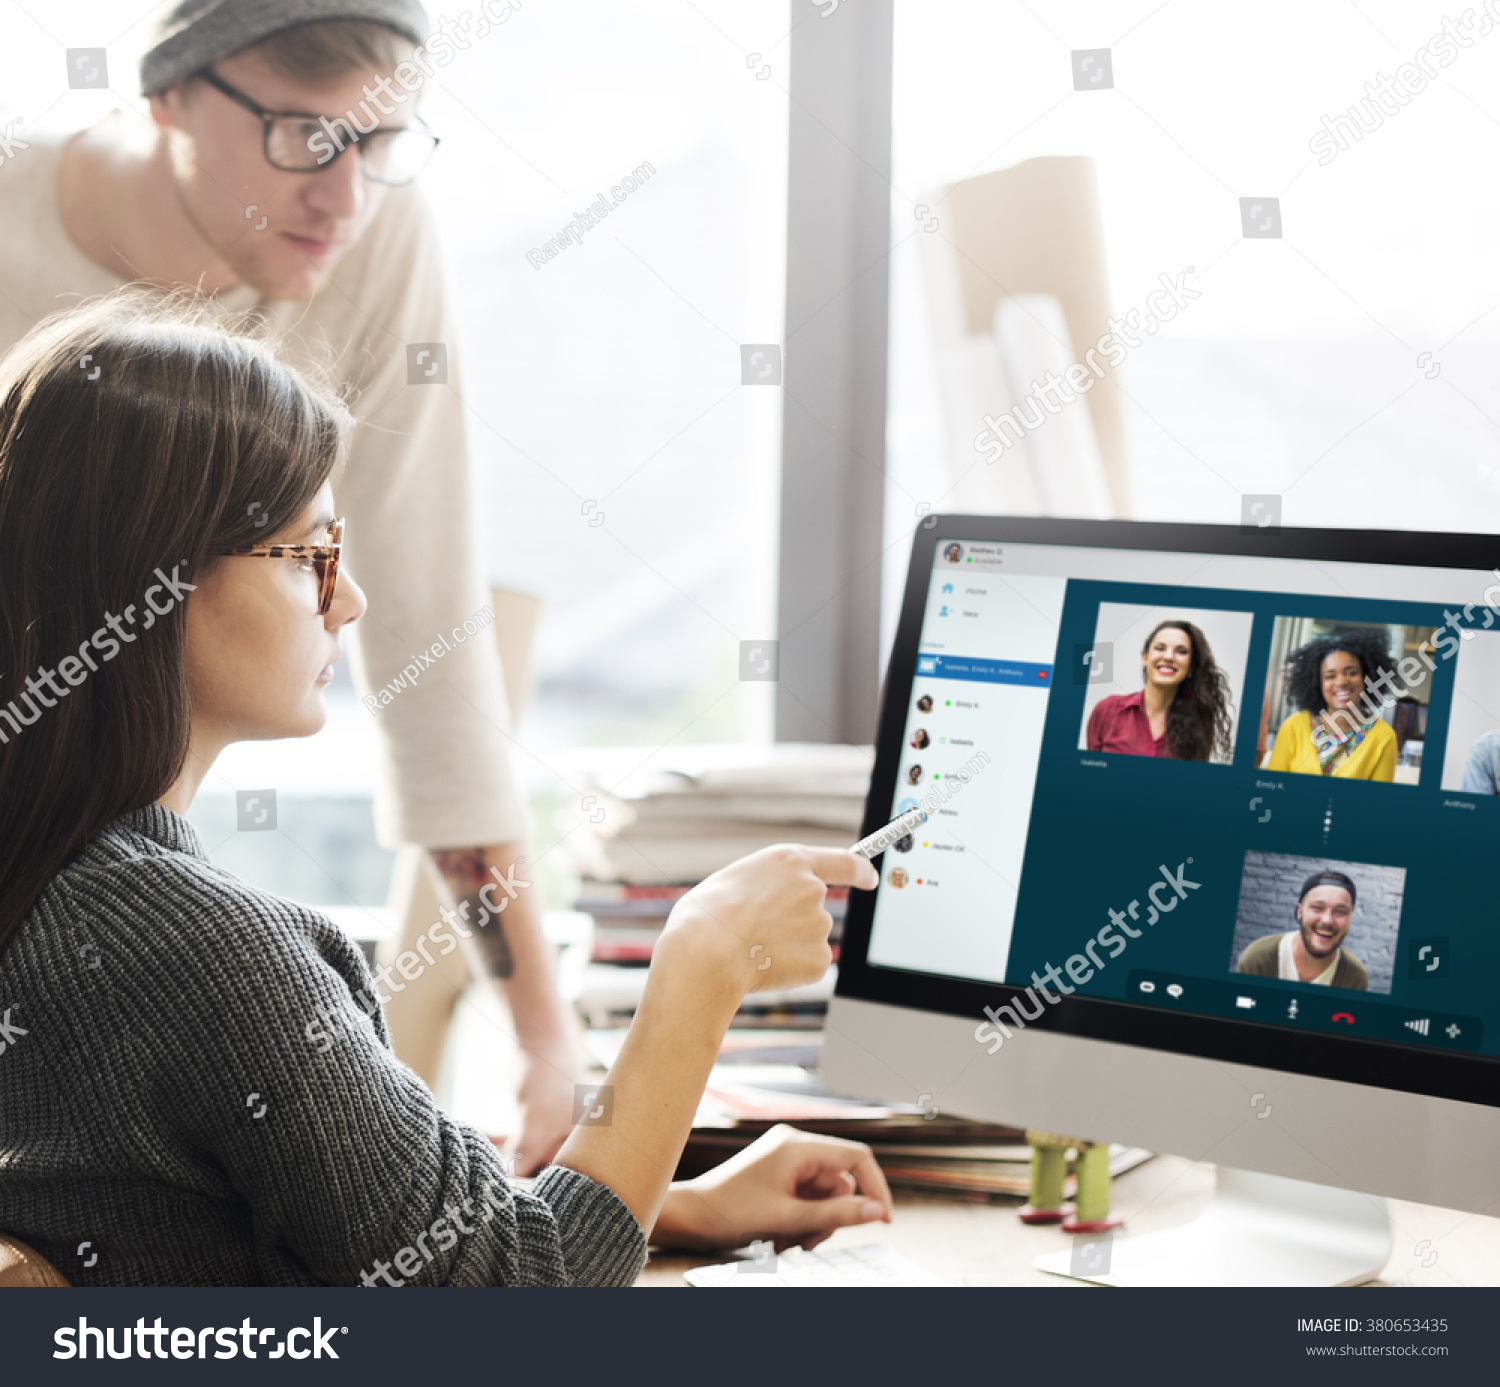 Group Friends Video Chat Connection Concept #380653435